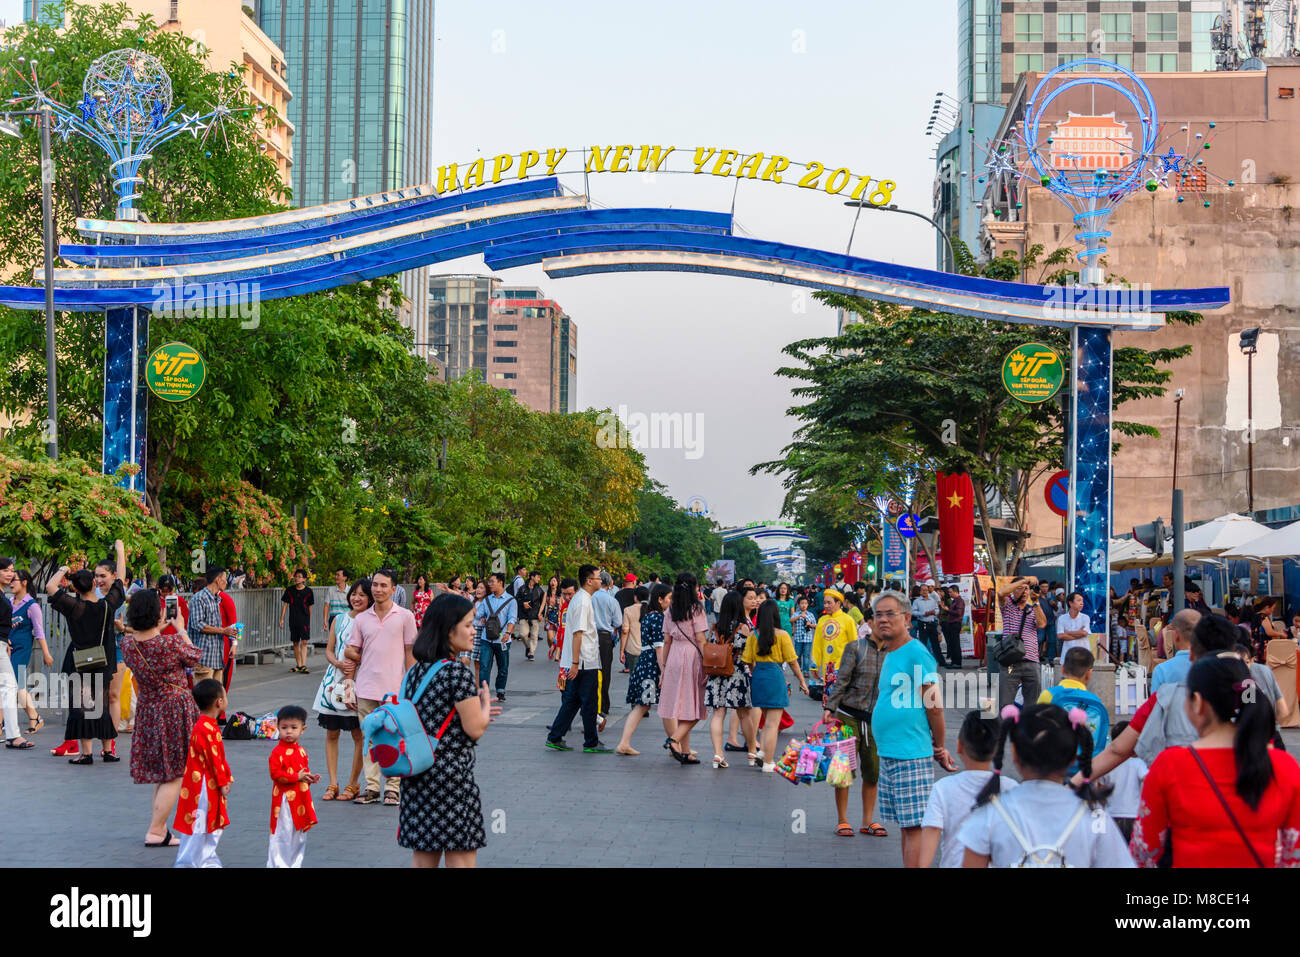 Crowds gather to celebrate the 2018 Chinese Lunar New Year, Ho Chi Minh City, Saigon, Vietnam Stock Photo